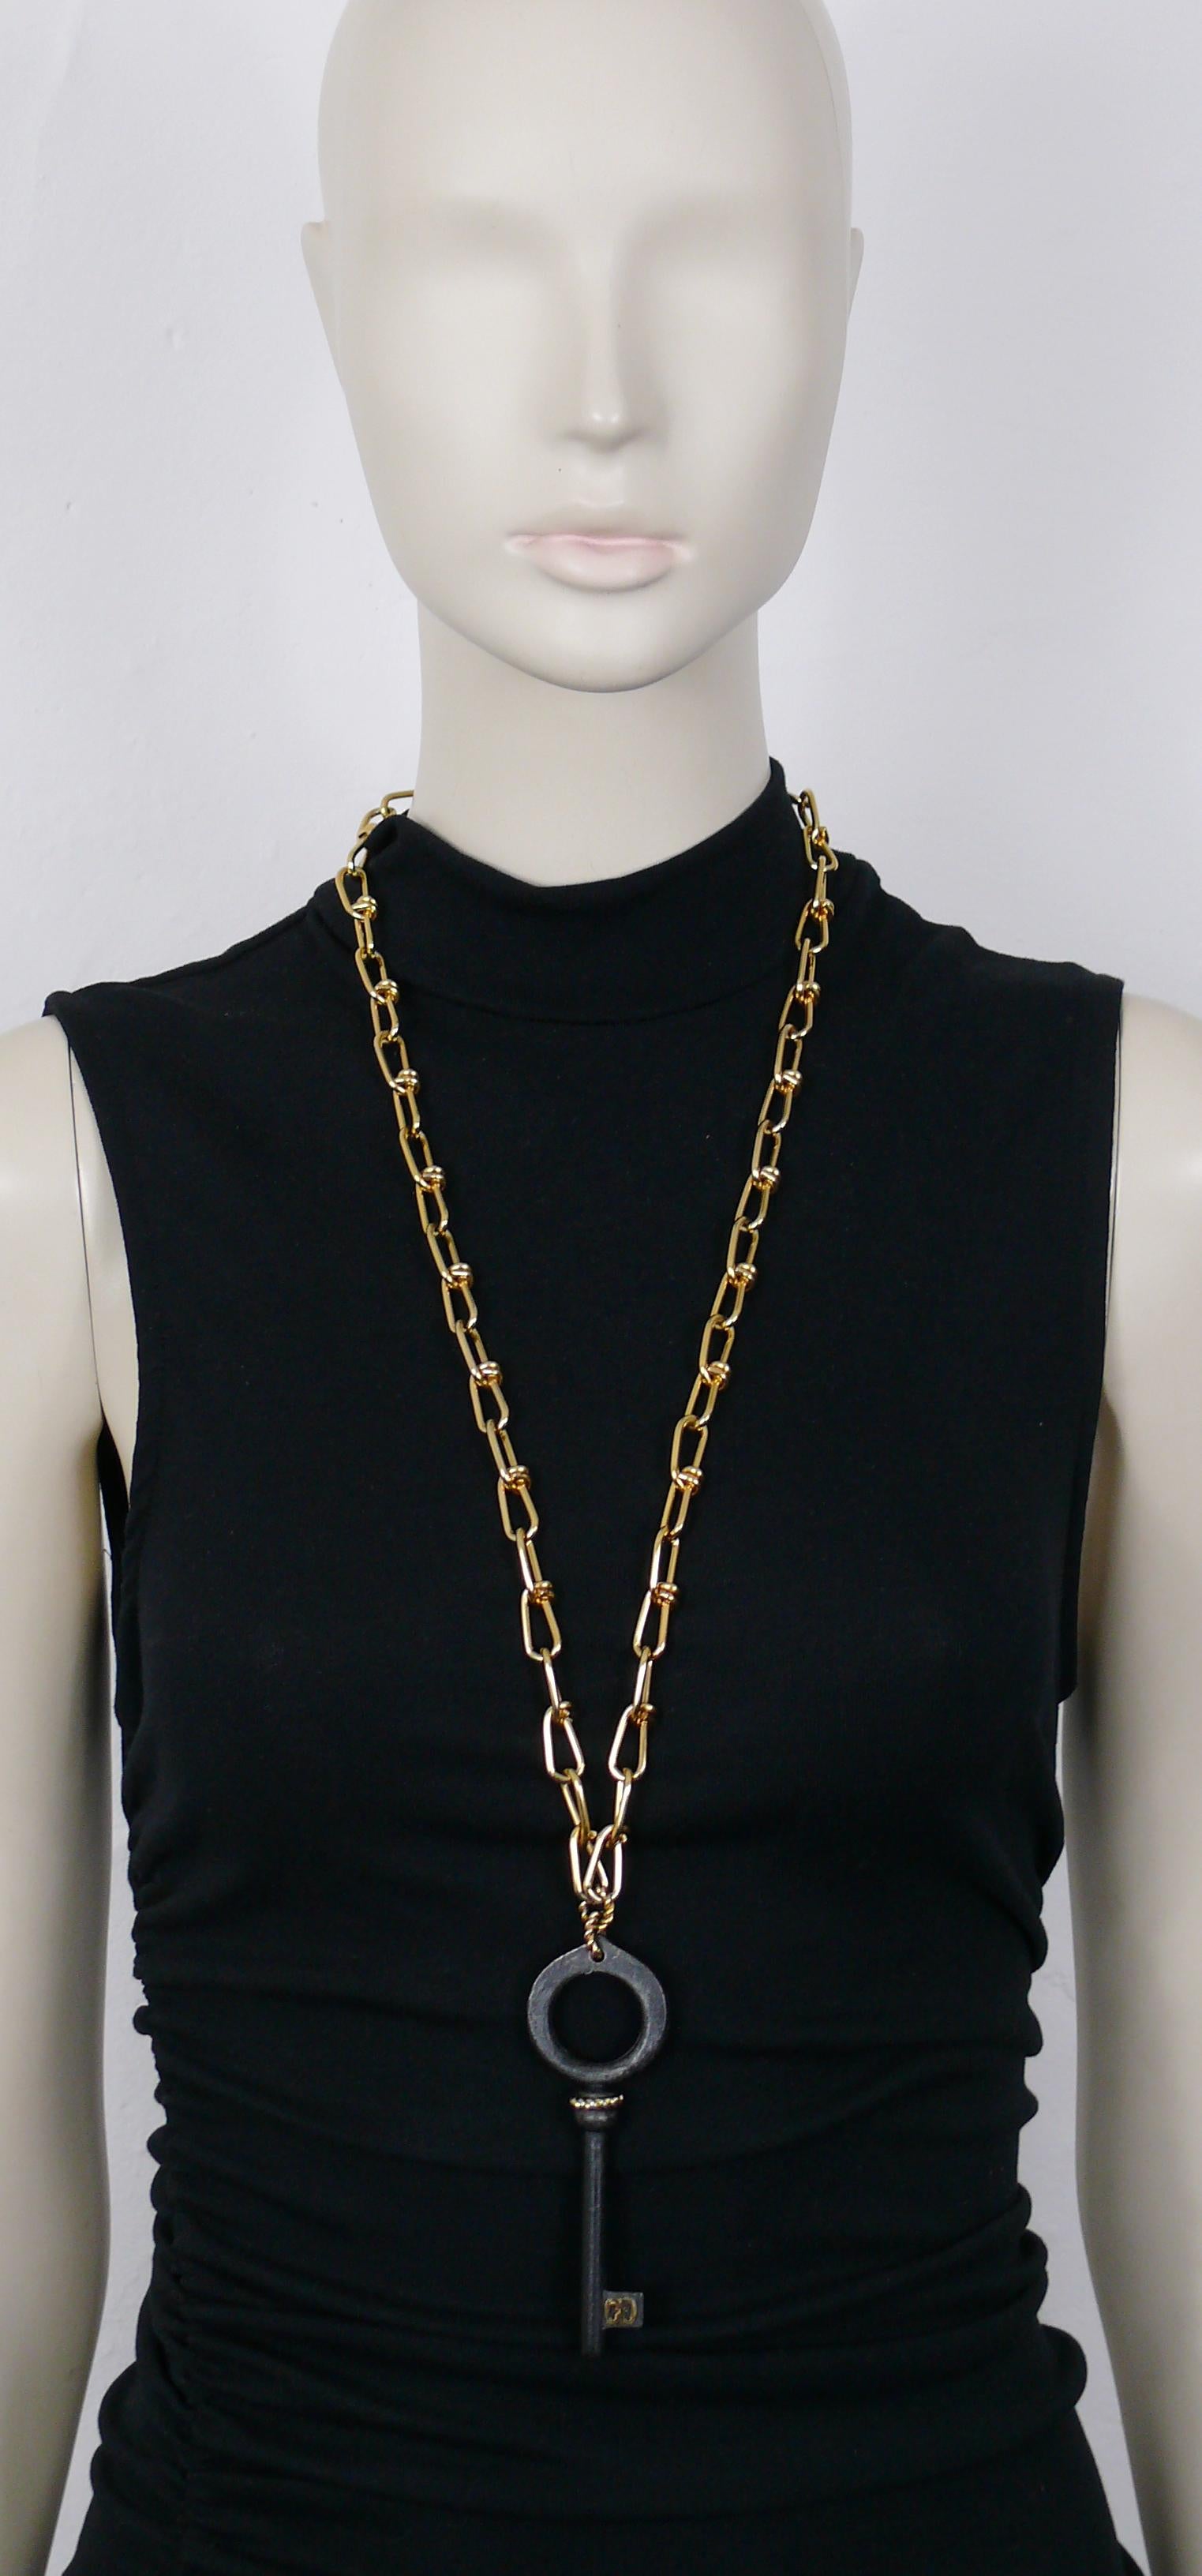 CHRISTIAN DIOR vintage rare gold toned chain necklace featuring a large distressed black patina key pendant with CD monogram.

Spring ring closure.

Embossed CHR. DIOR 1969 Germany.

Indicative measurements : chain length approx. 80 cm (31.50